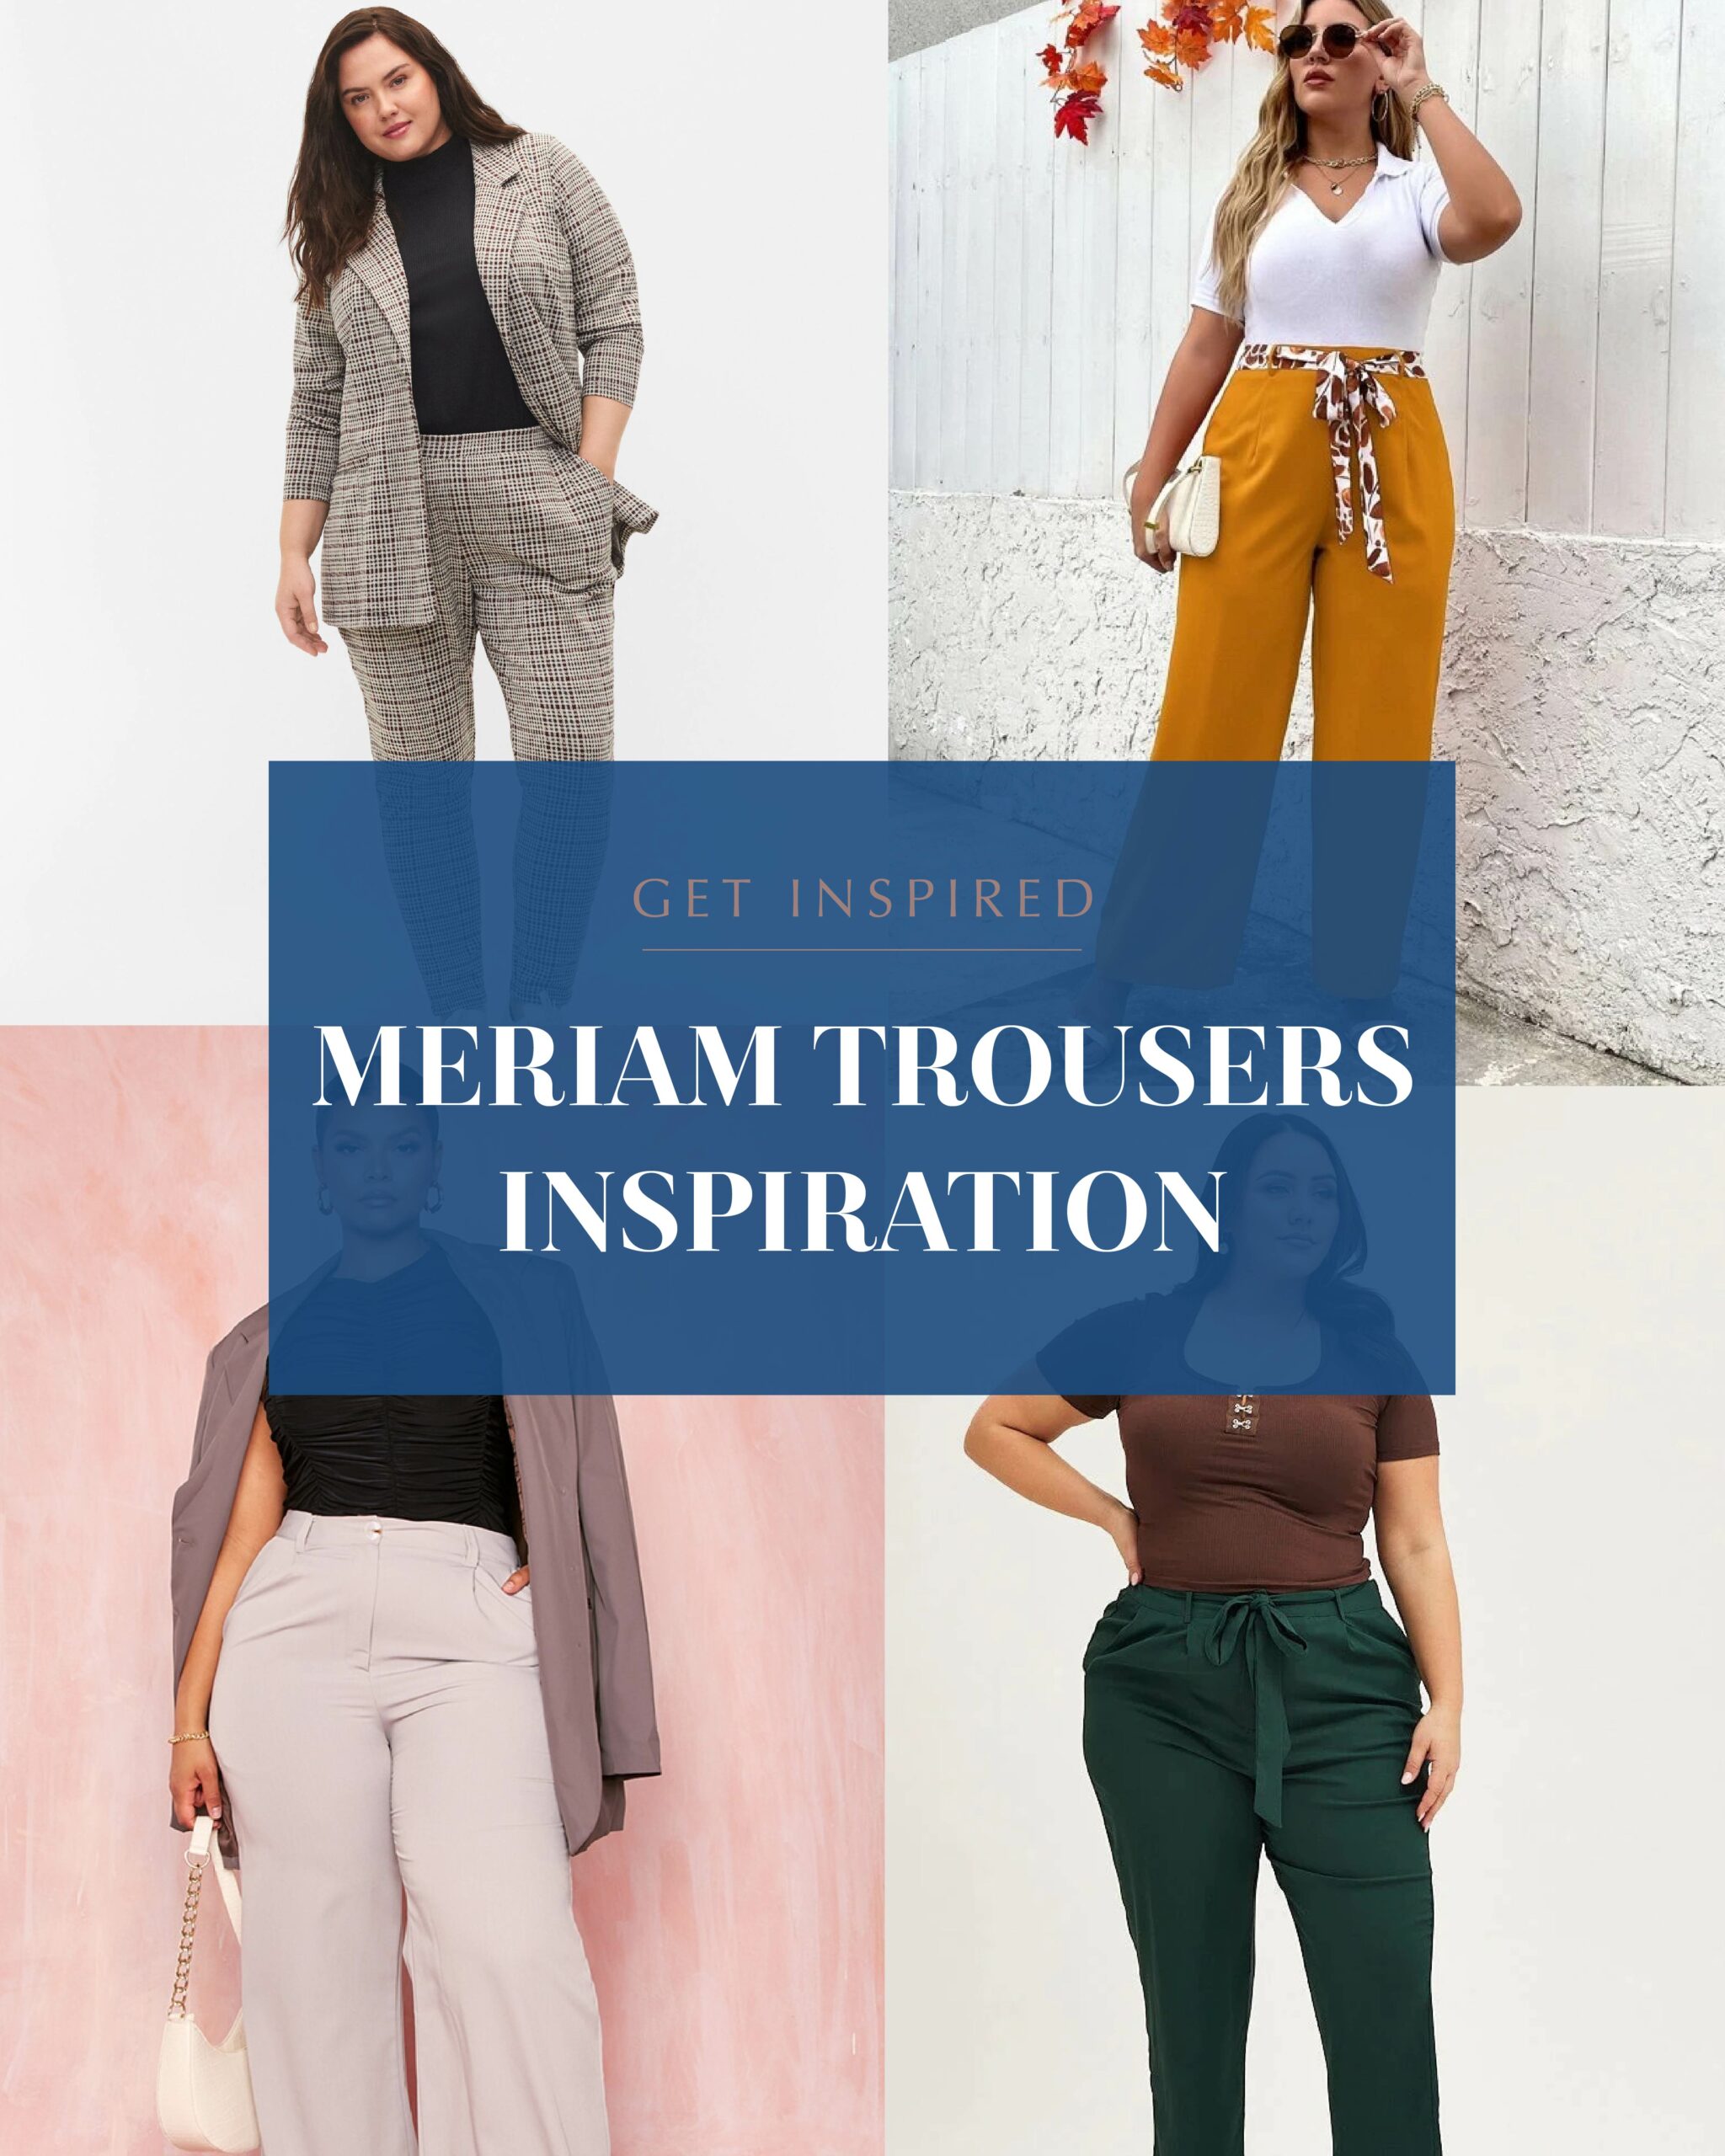 Ready-to-Wear Inspiration for the Meriam Trousers